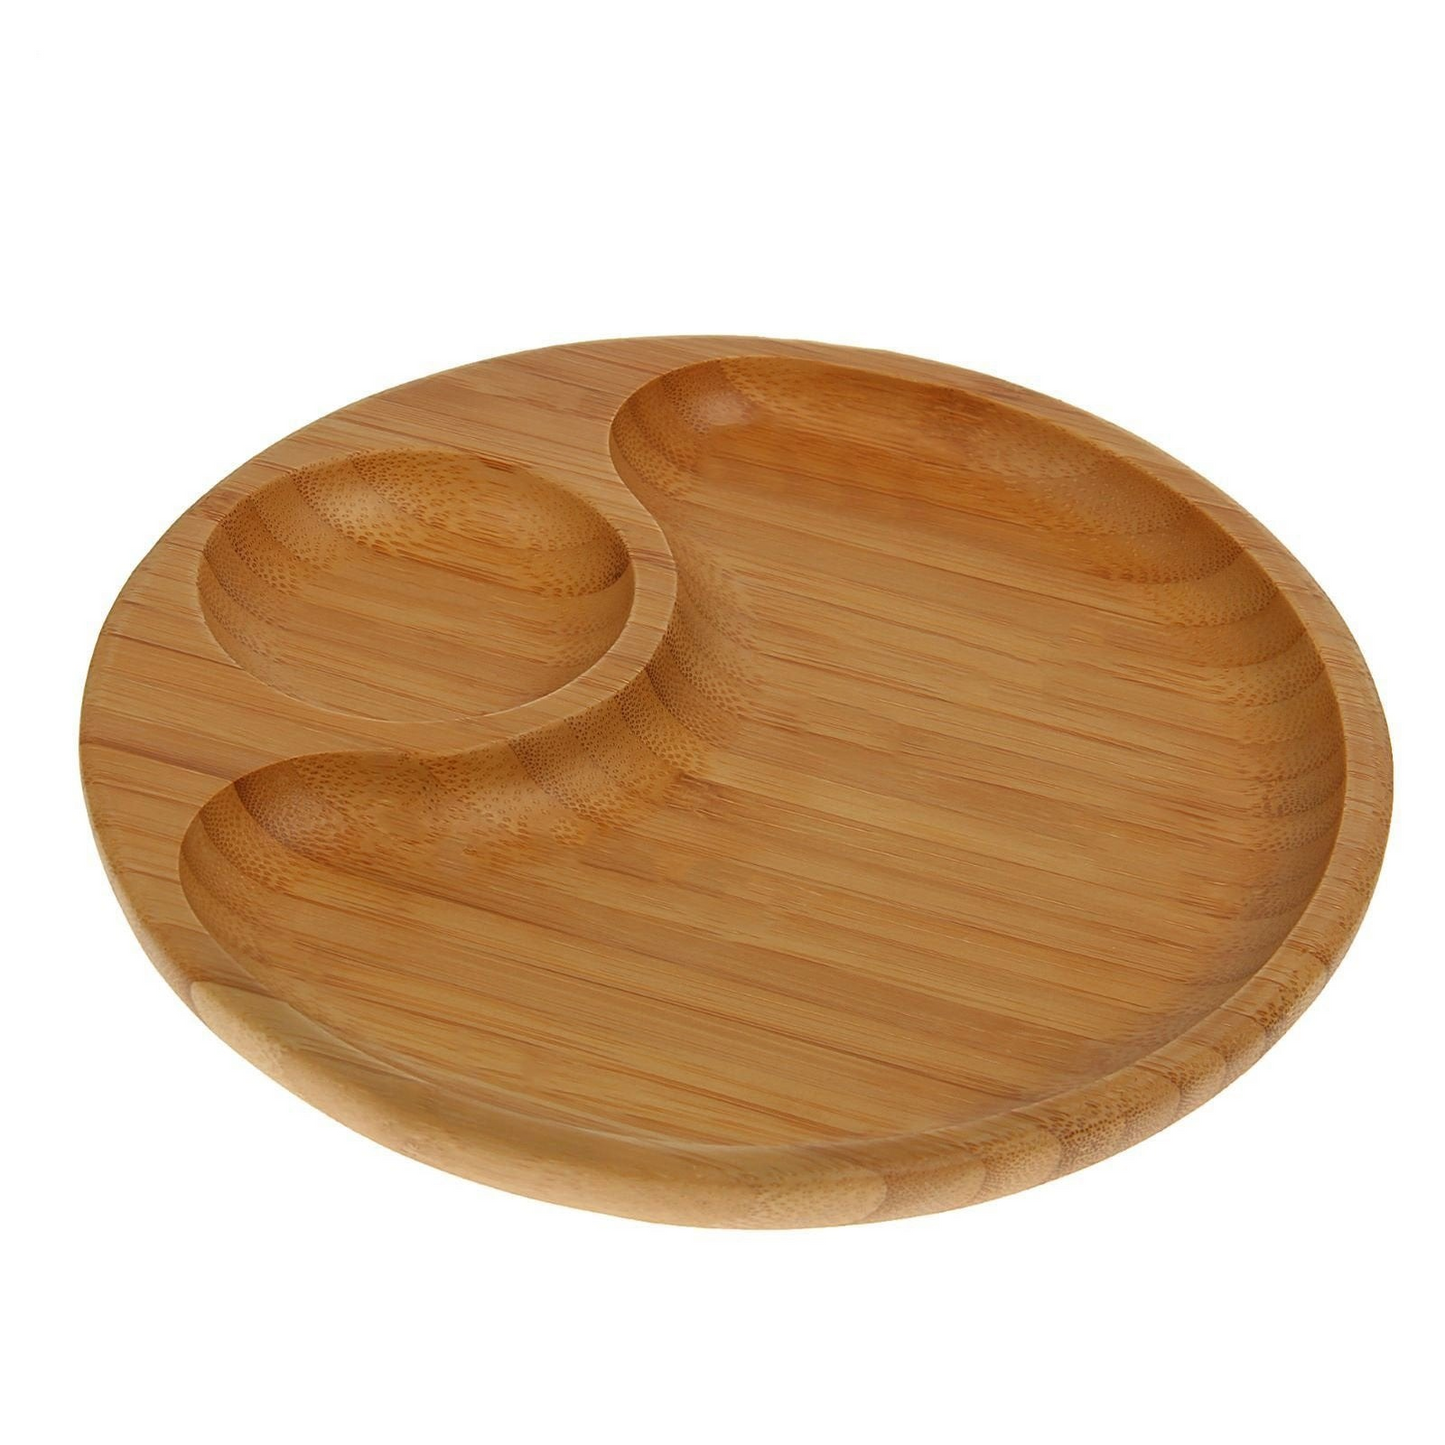 Wilmax [A] Natural Bamboo 2 Section Platter 10" | 25 Cm WL-771043/A